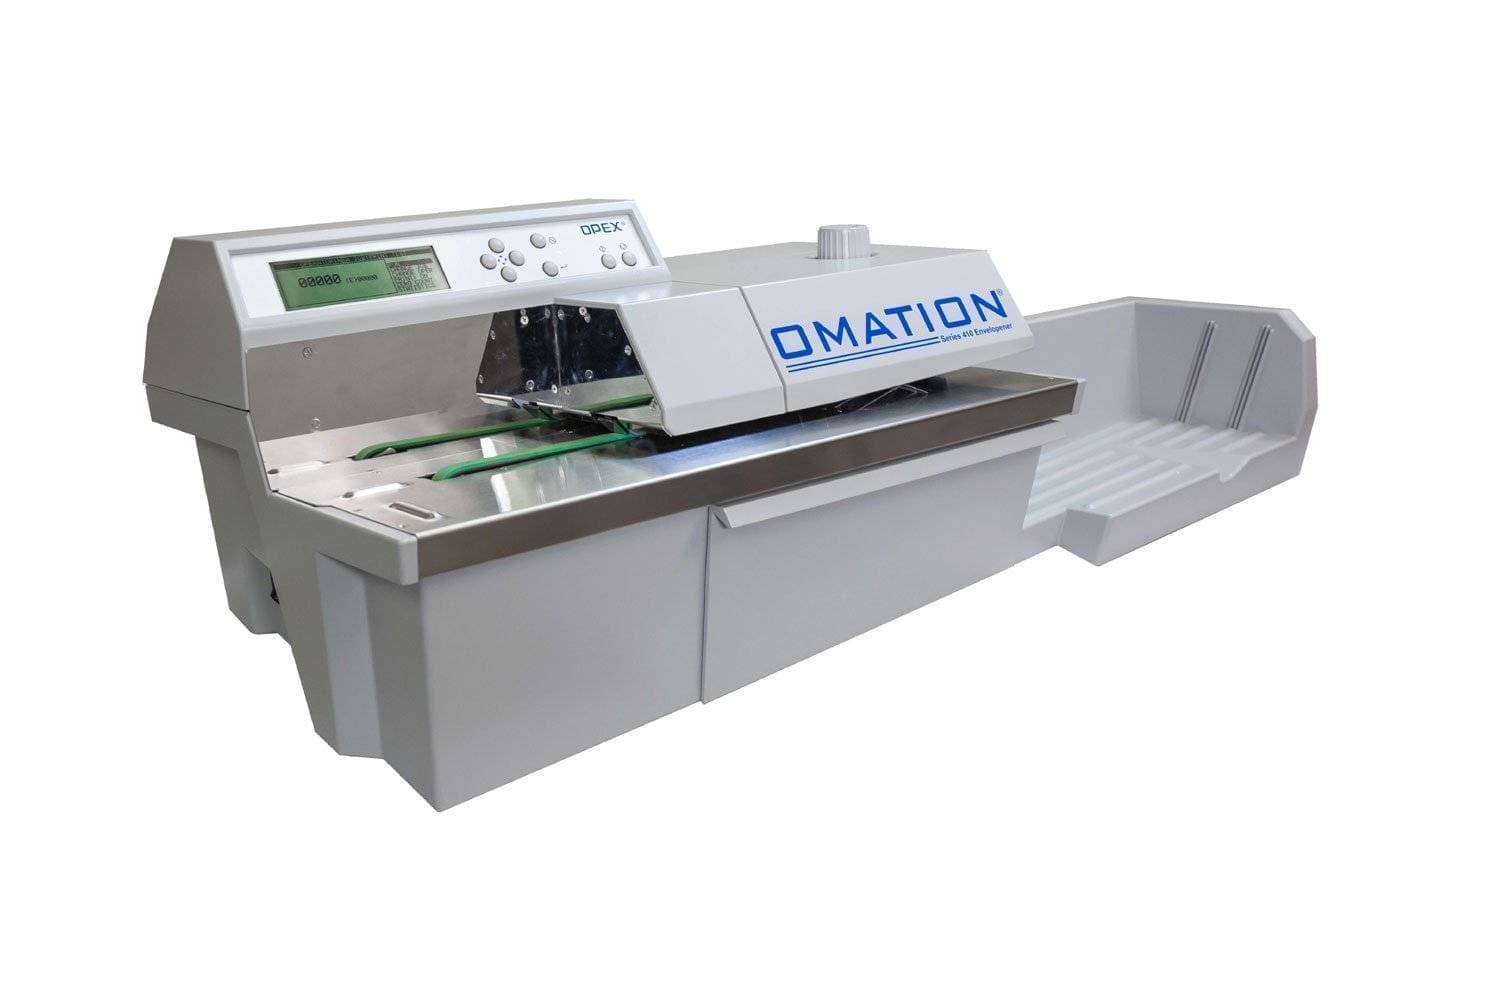 Automated Mailroom, LLC - Letter Opener, Letter Opener Machine